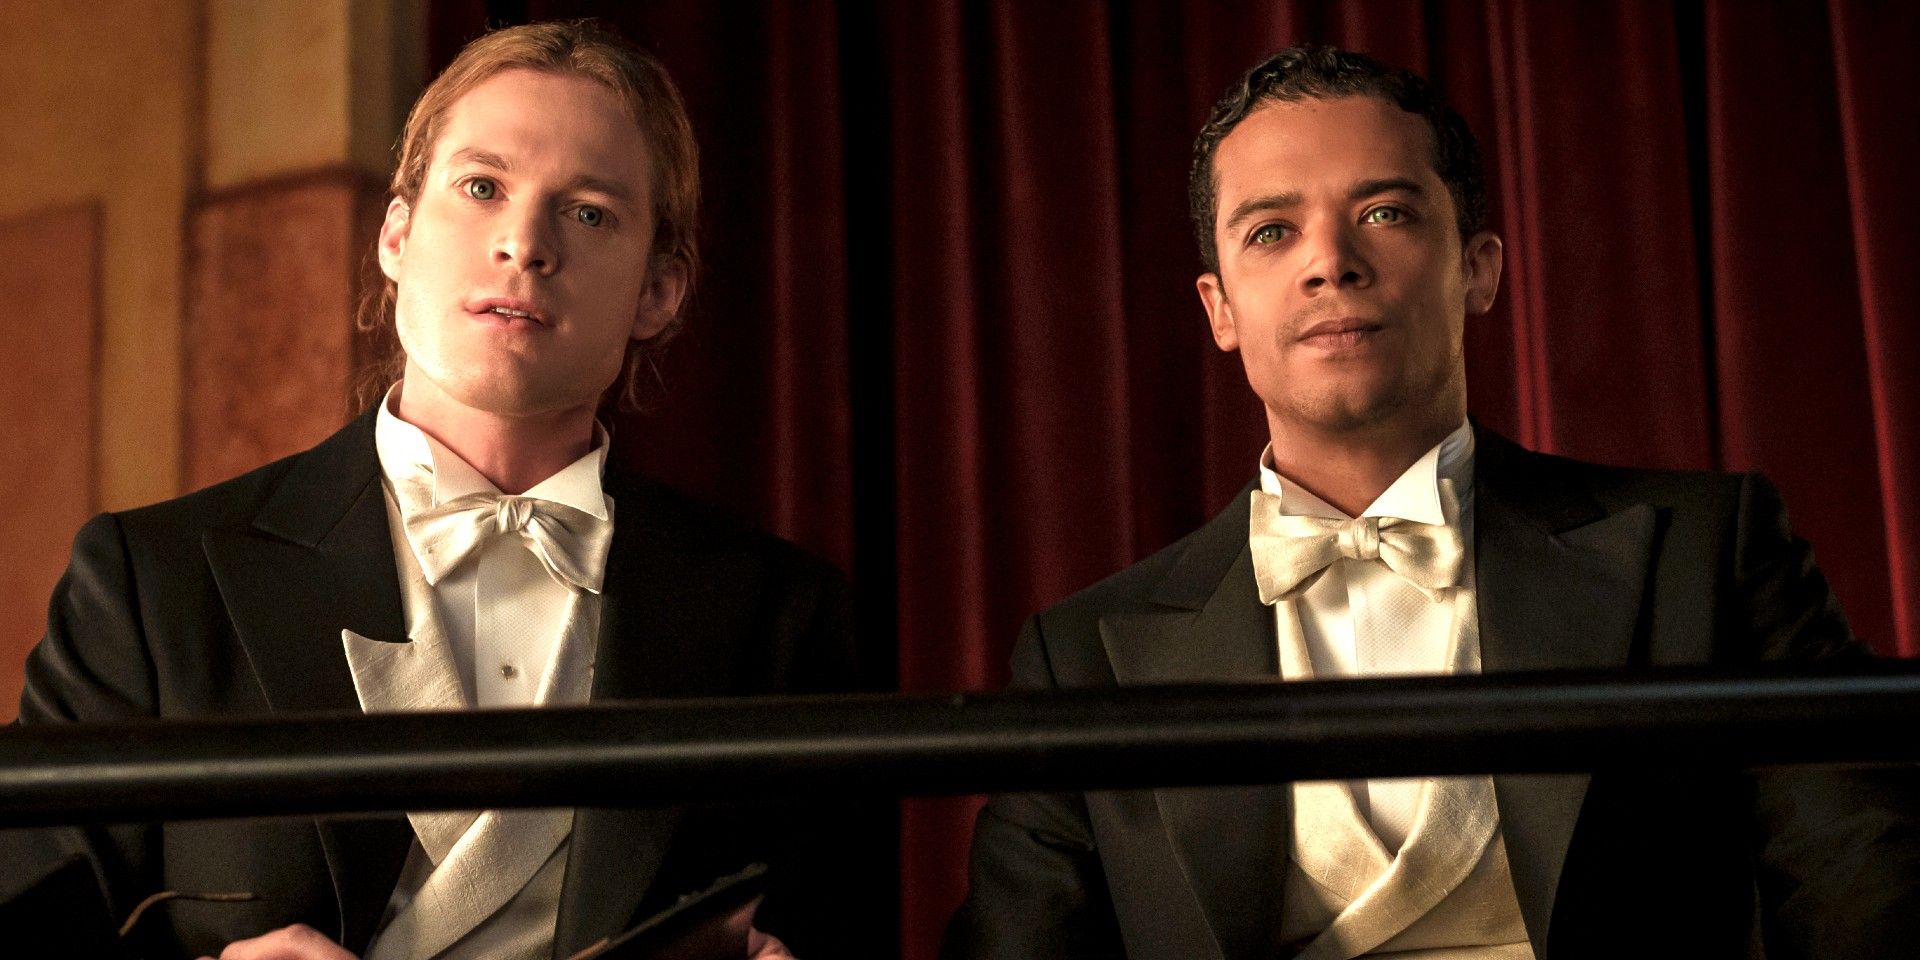 Two characters played by Sam Reed and Jacob Anderson from the show Interview with the Vampire